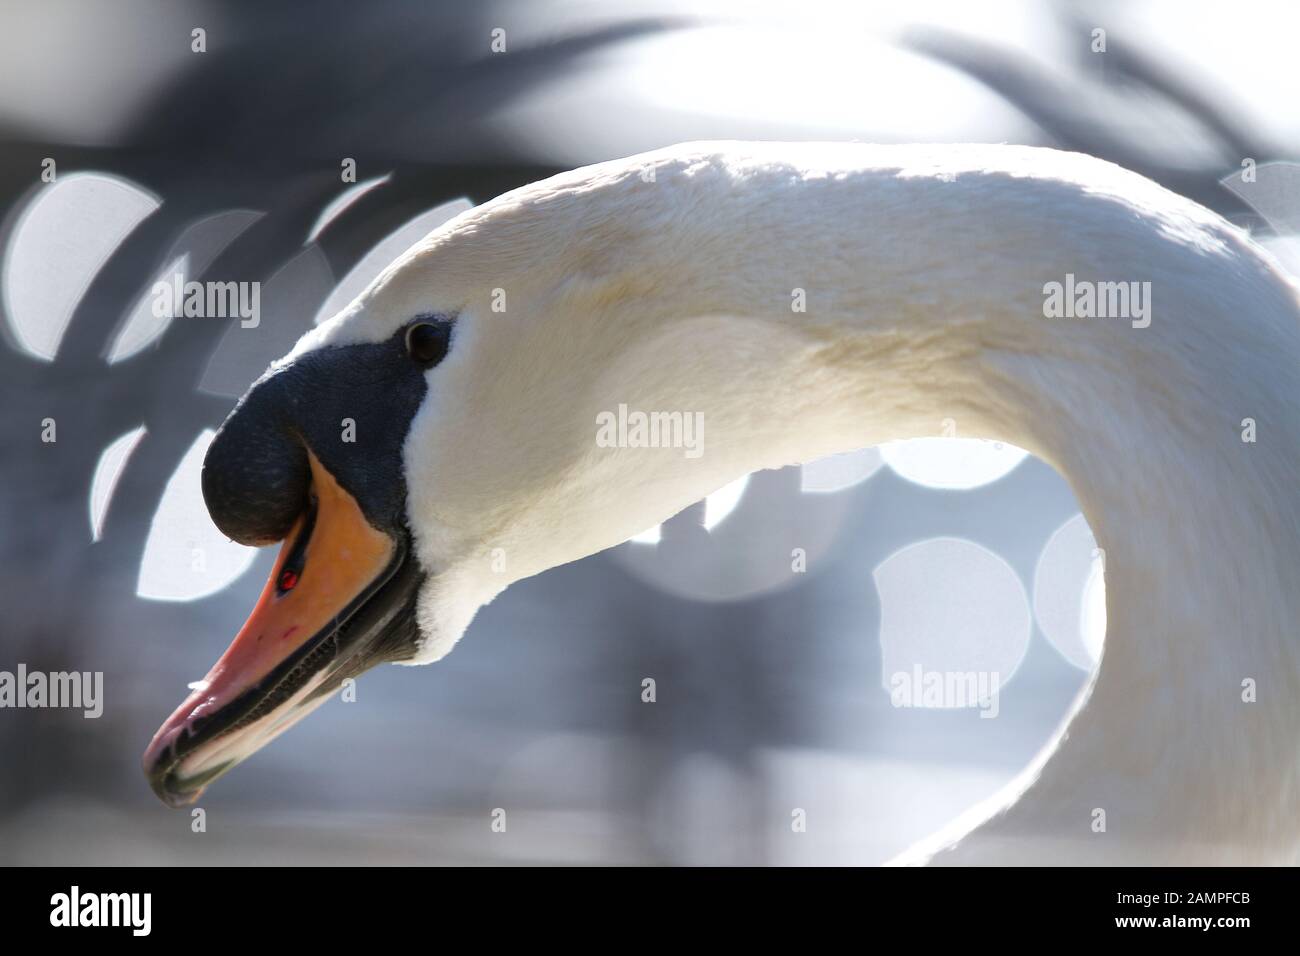 Close-up shot of a swan's head Stock Photo